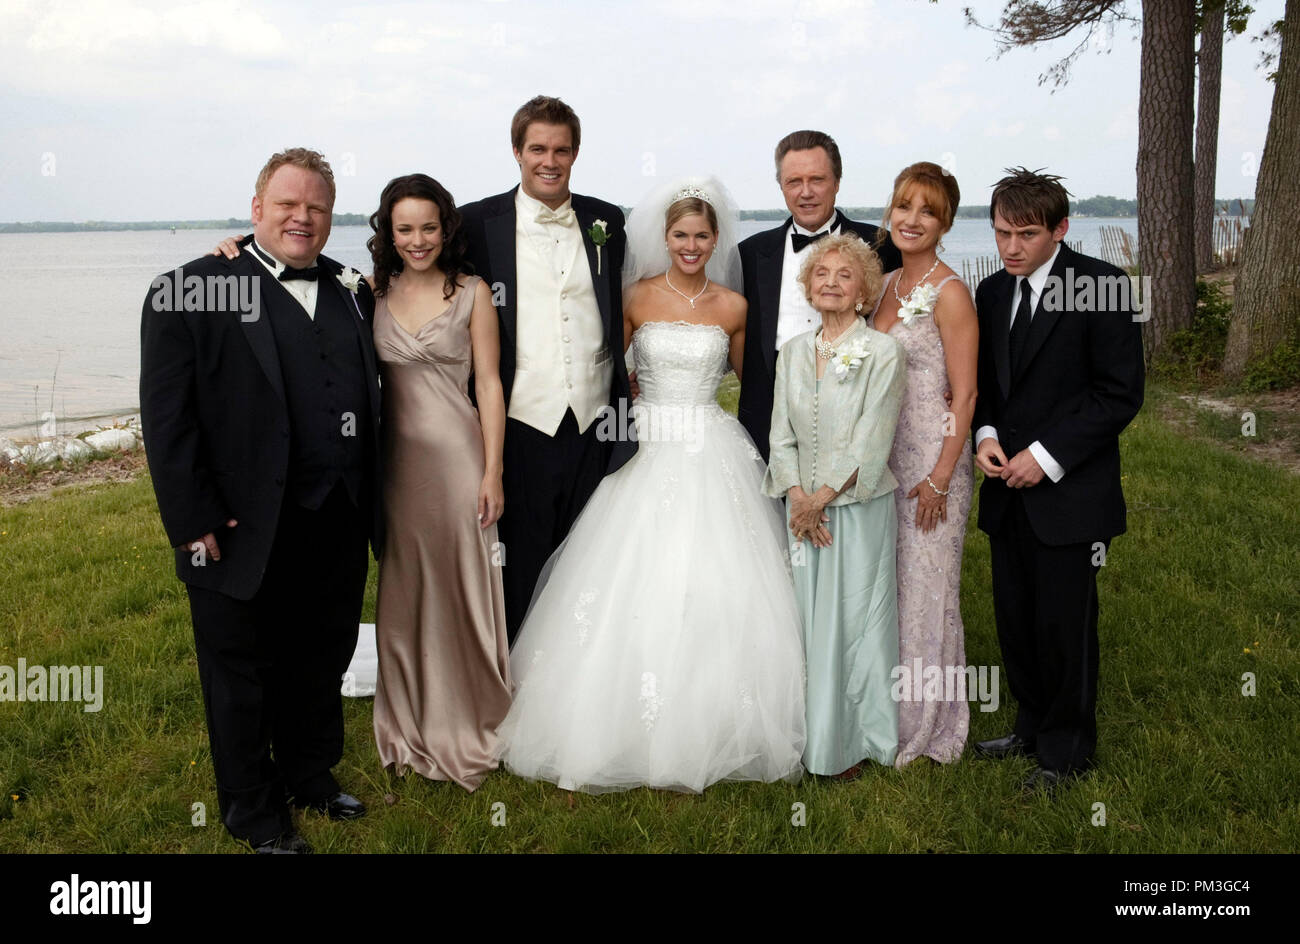 Film Still from 'Wedding Crashers' Larry Joe Campbell, Rachel McAdams, Geoff Stults, Jennifer Alden, Christopher Walken, Ellen Albertini Dow, Jane Seymour, Keir O'Donnell © 2005 New Line Cinema Photo Credit: Richard Cartwright  File Reference # 307351029THA  For Editorial Use Only -  All Rights Reserved Stock Photo